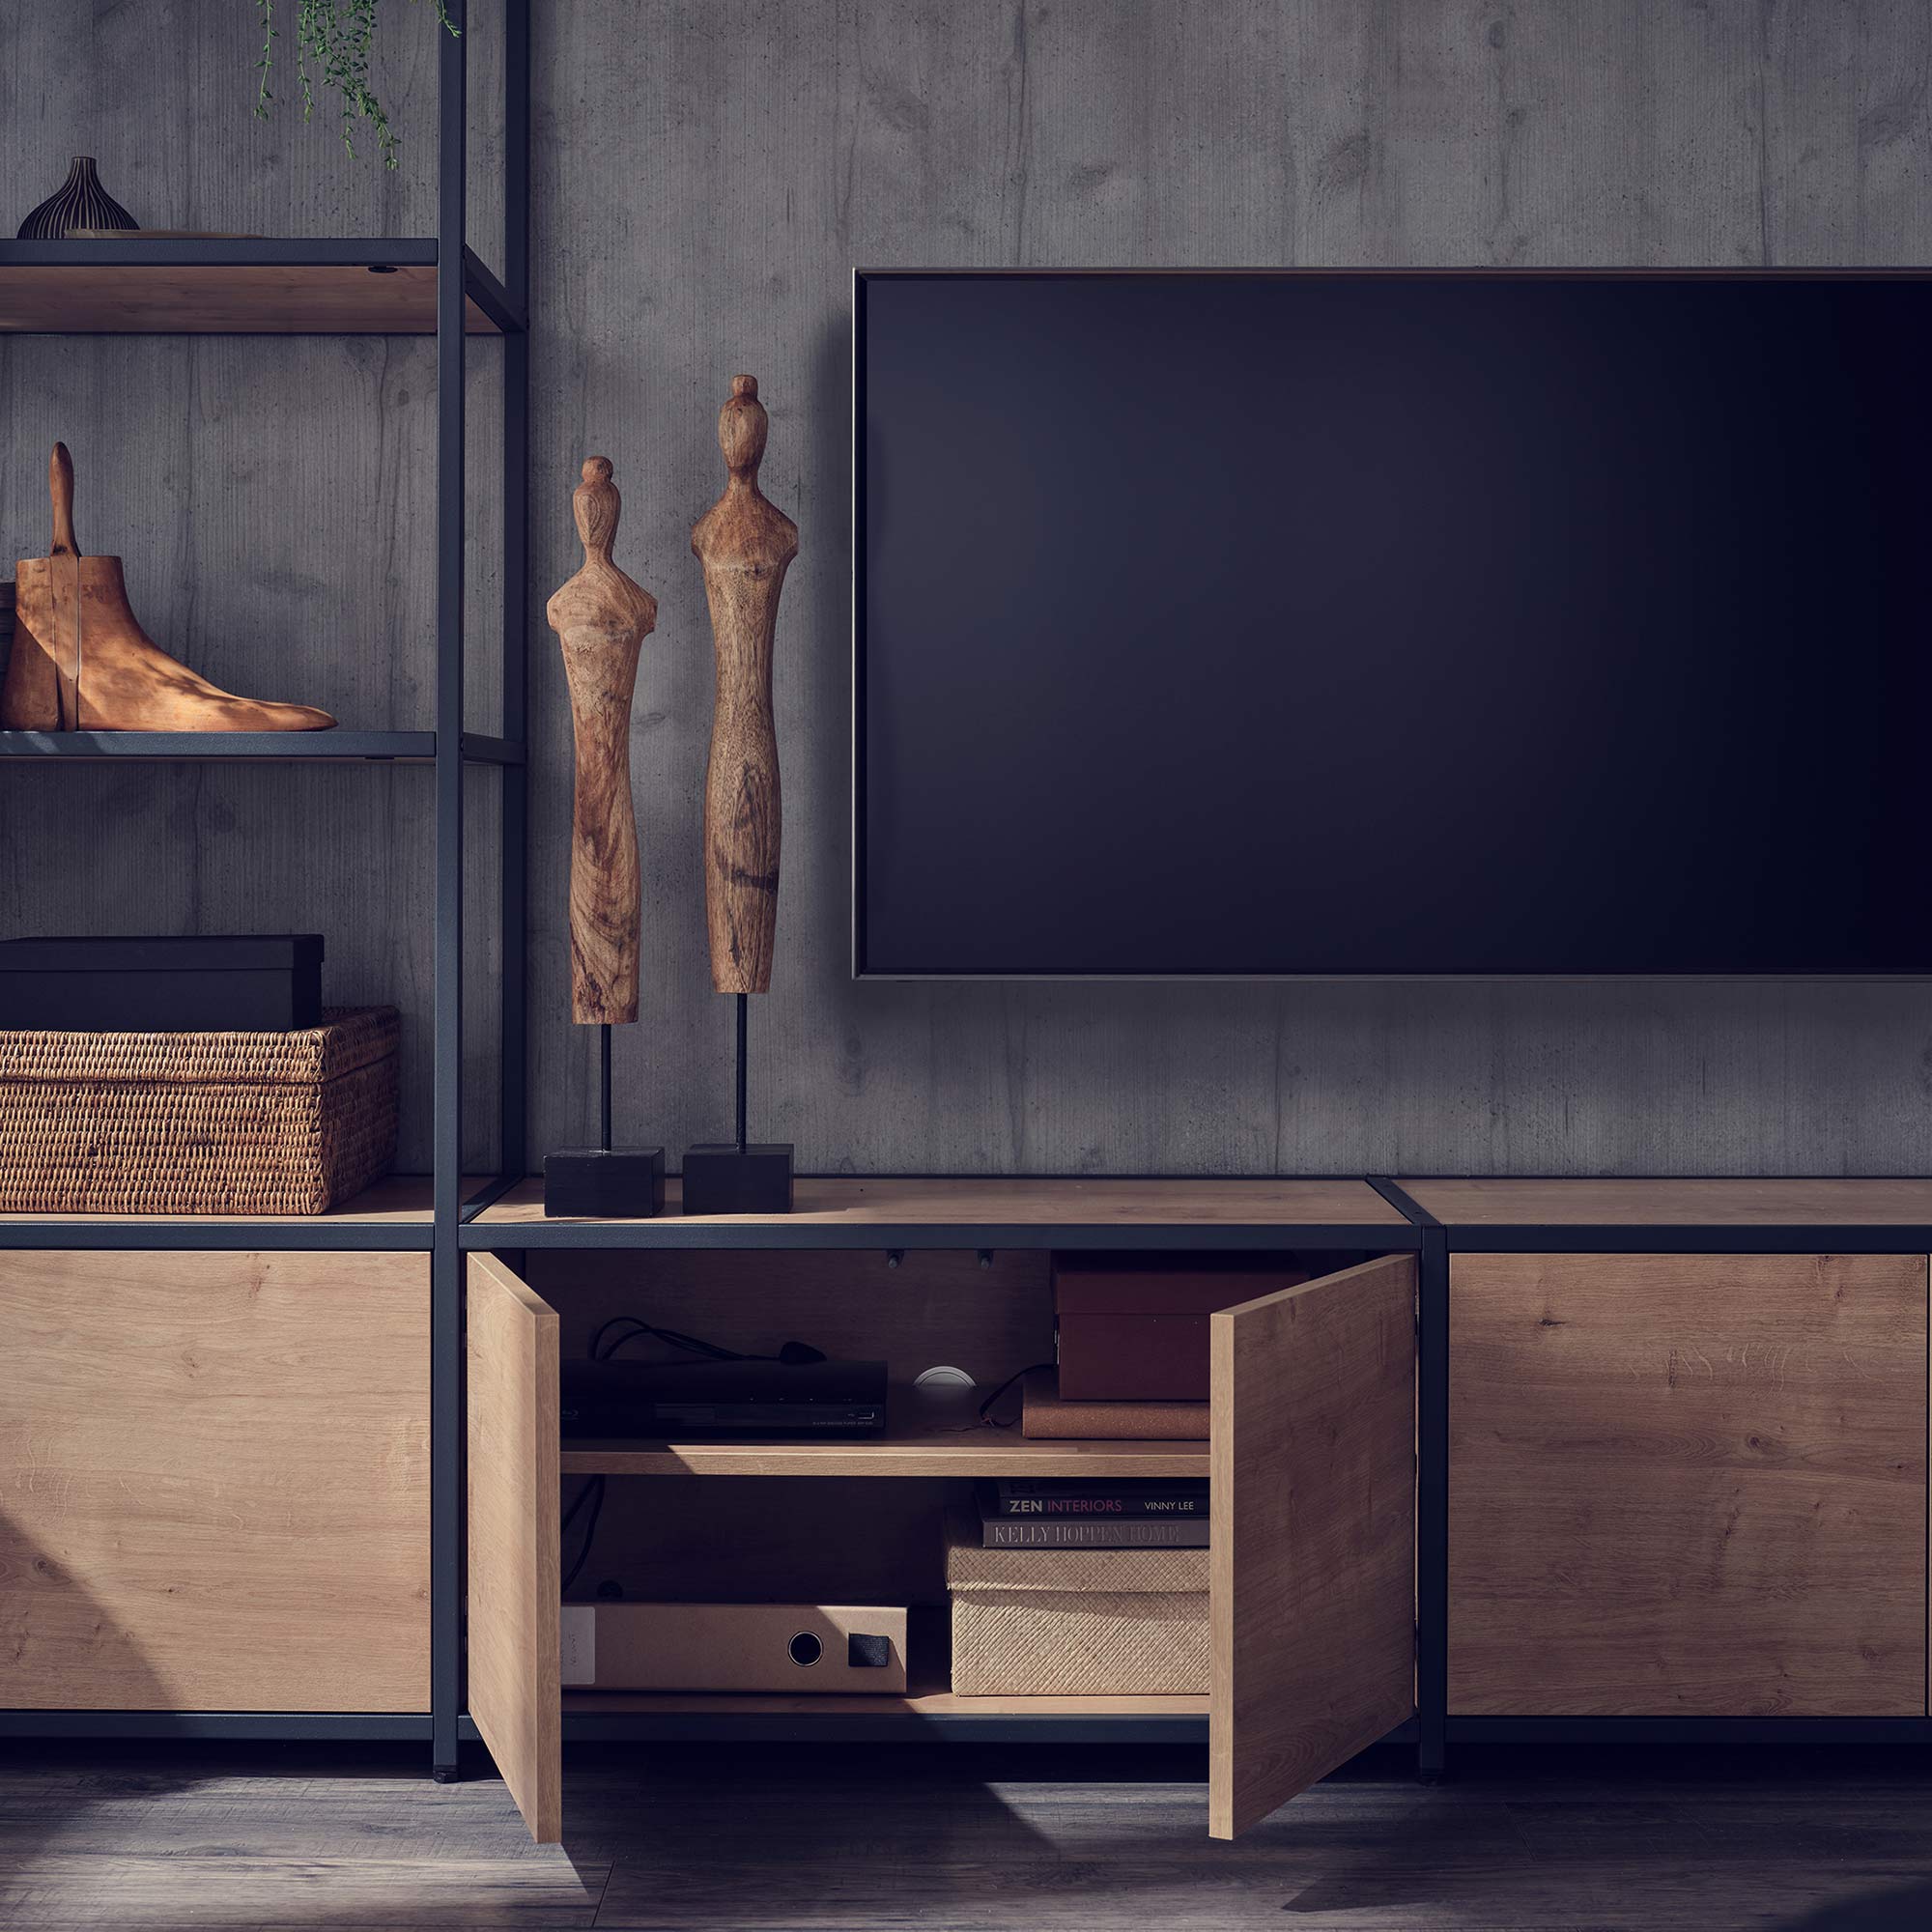 TV surrounded by wooden shelving and cupboards